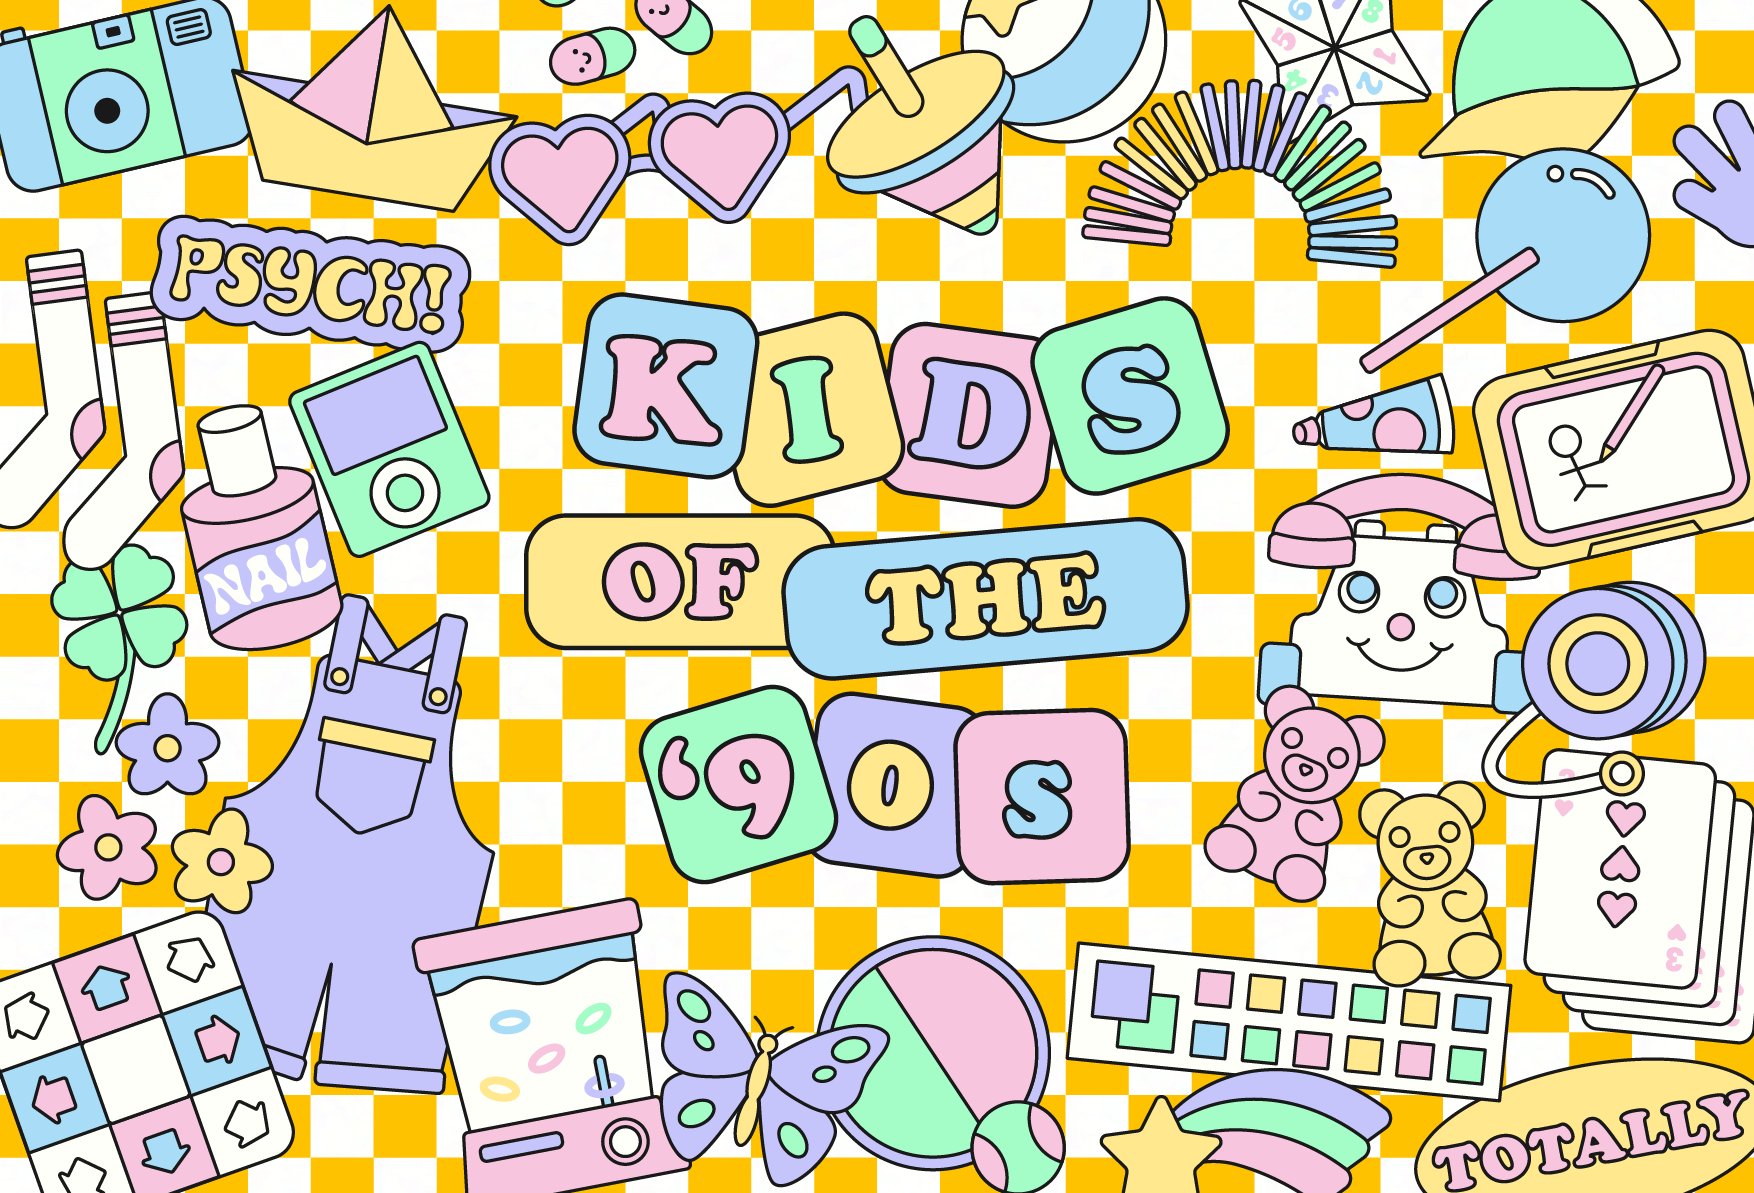 Kids of the '90s Sticker Pack cover image.